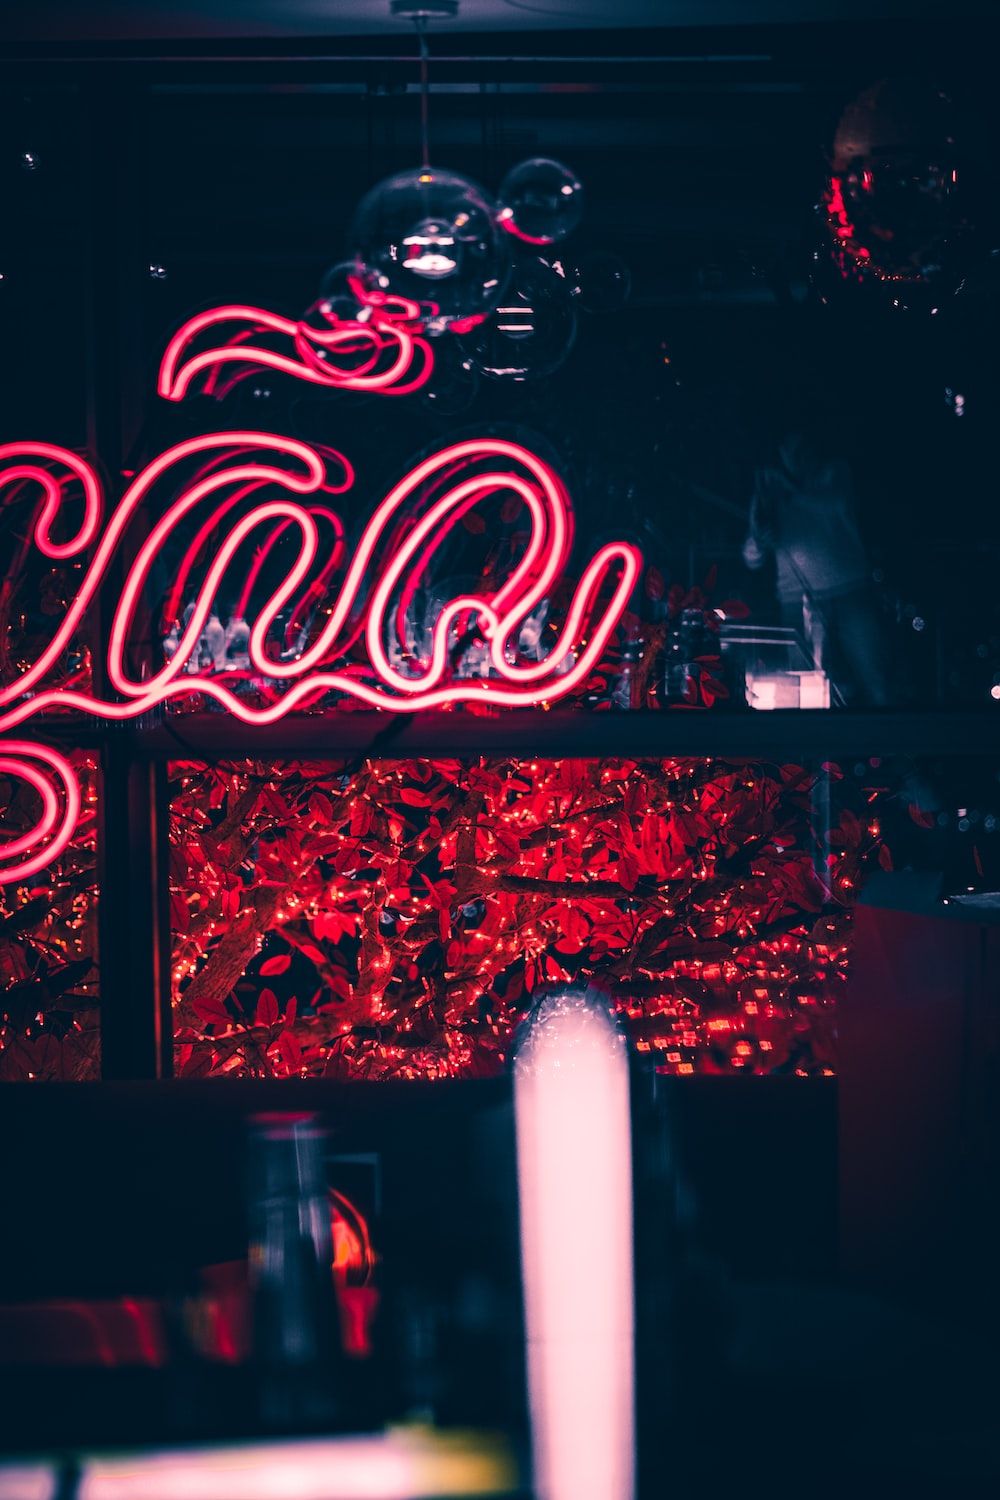 A neon sign in a dark room with red lights photo